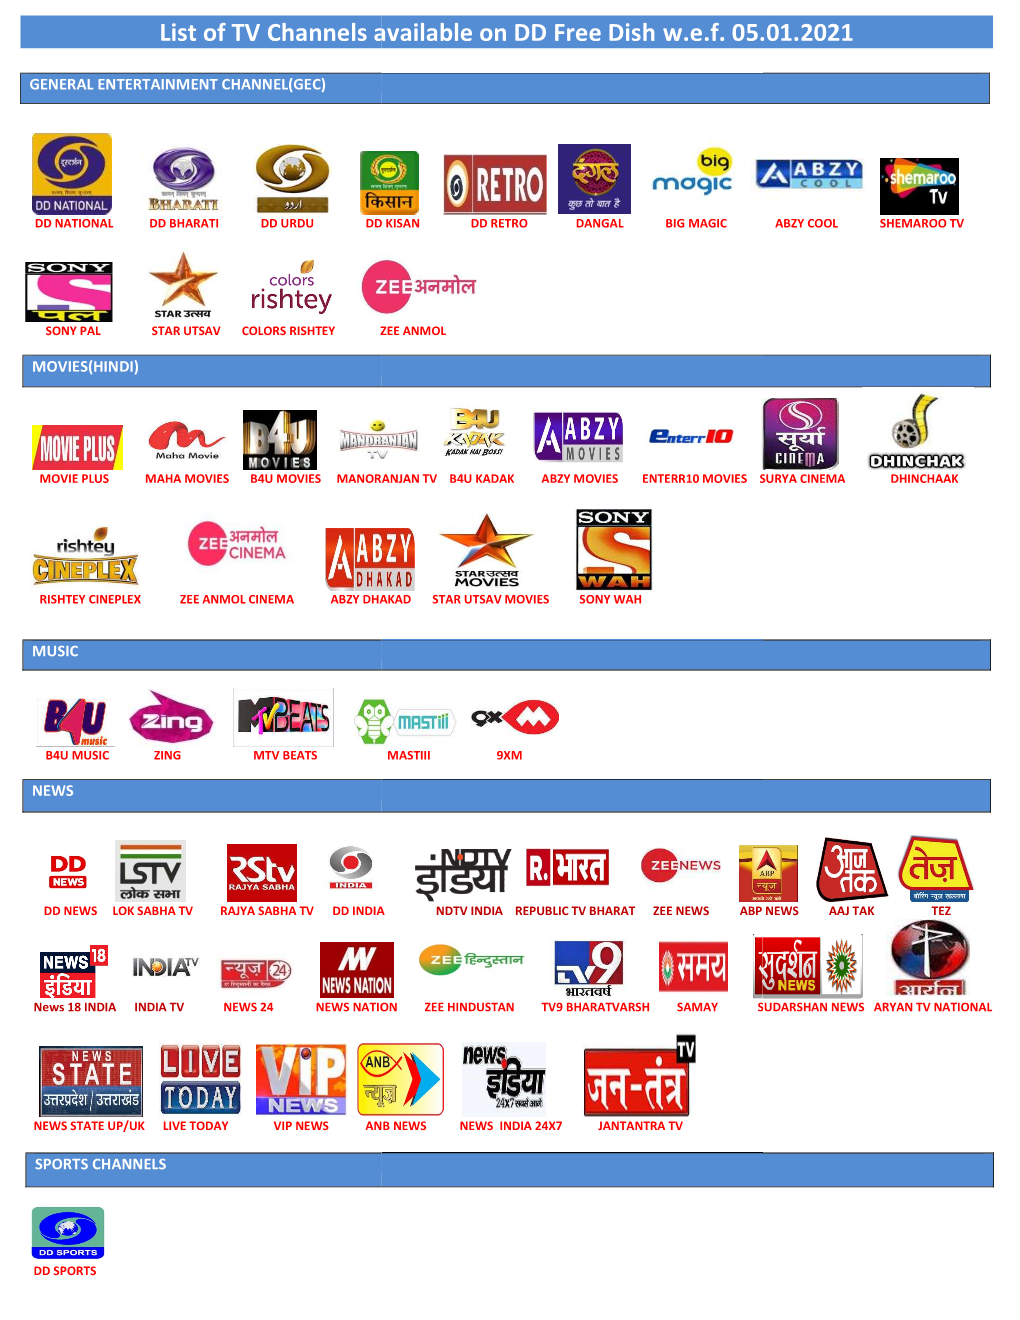 List of TV Channels Available on D Channels Available on DD Free Dish W.E.F. 05.01.2021 5.01.2021